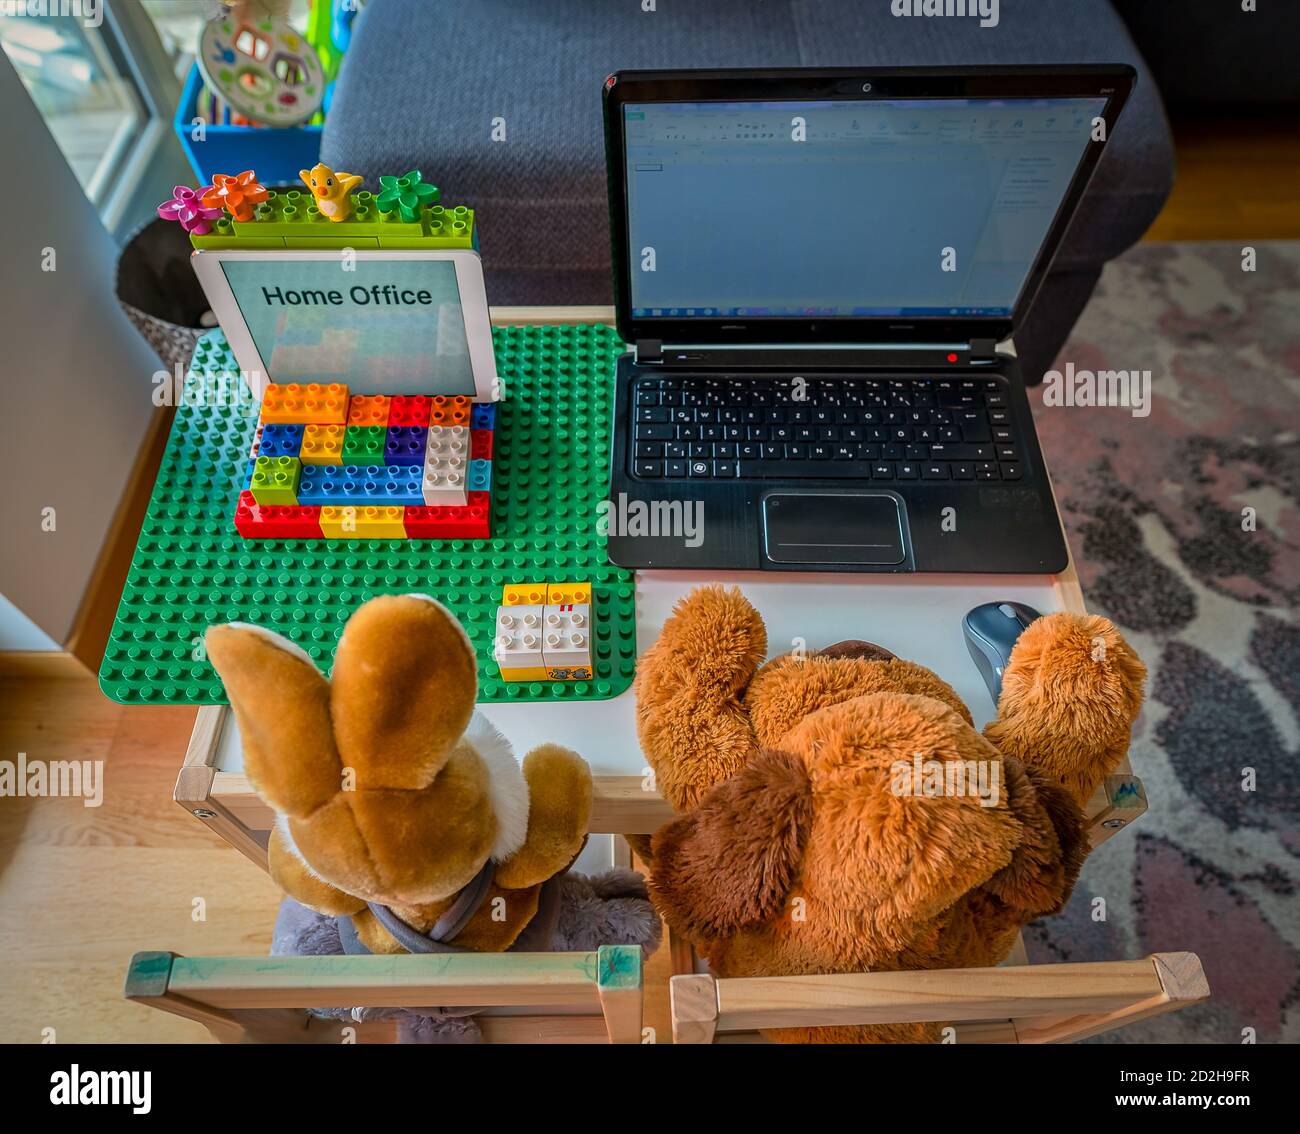 View from the top at a cute homeoffice scene with a stuffed teddy bear and his friend a rabbit working at a laptop. Stock Photo